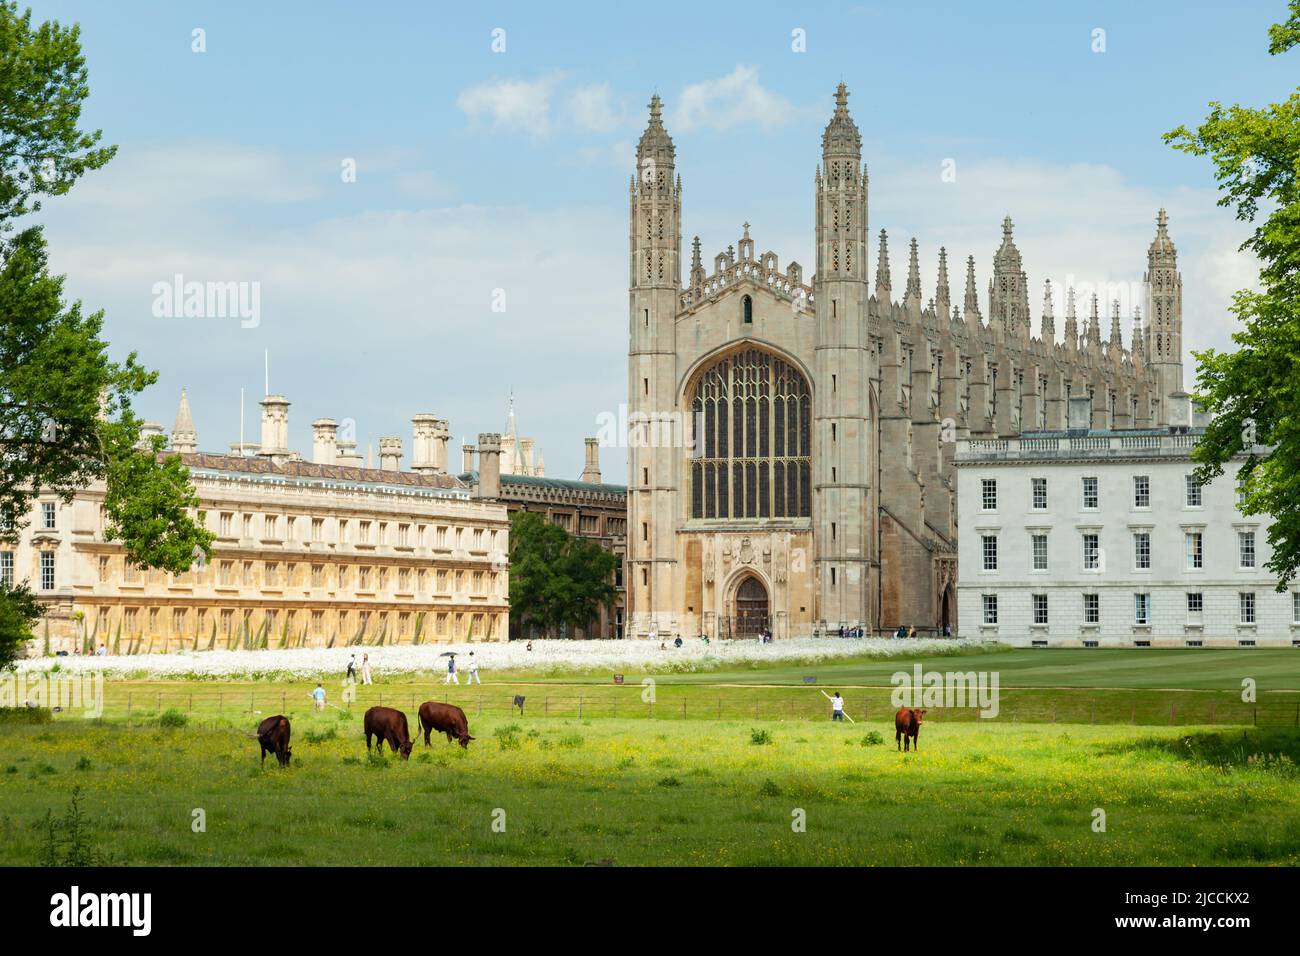 King's College in Cambridge seen from the Backs on a spring afternoon, Cambridgeshire, England. Stock Photo